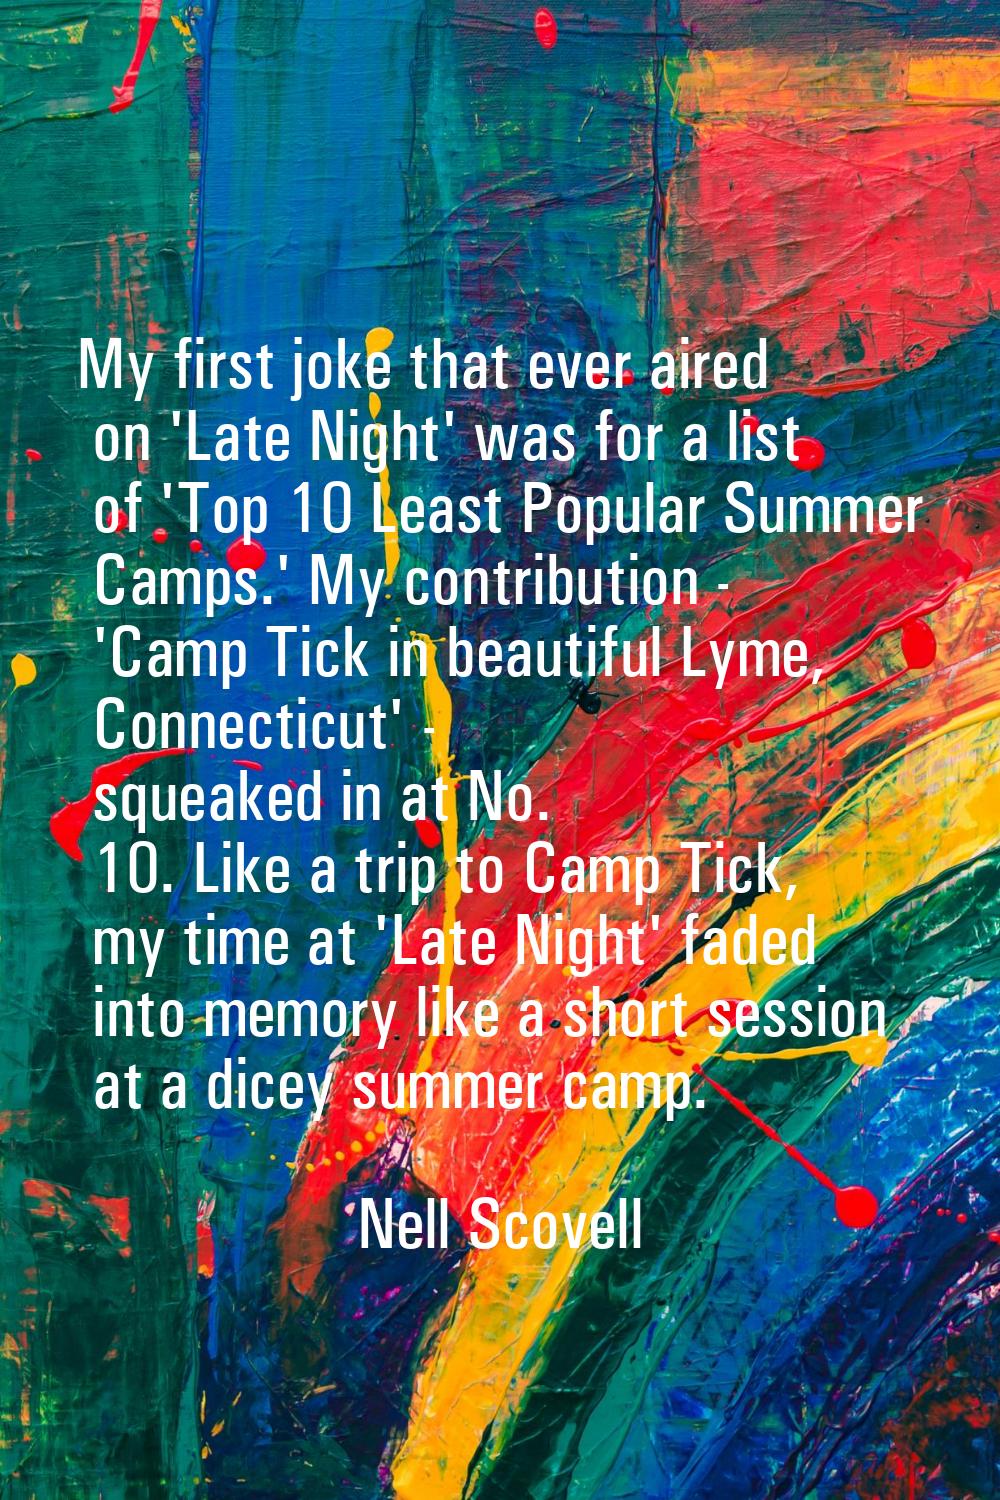 My first joke that ever aired on 'Late Night' was for a list of 'Top 10 Least Popular Summer Camps.